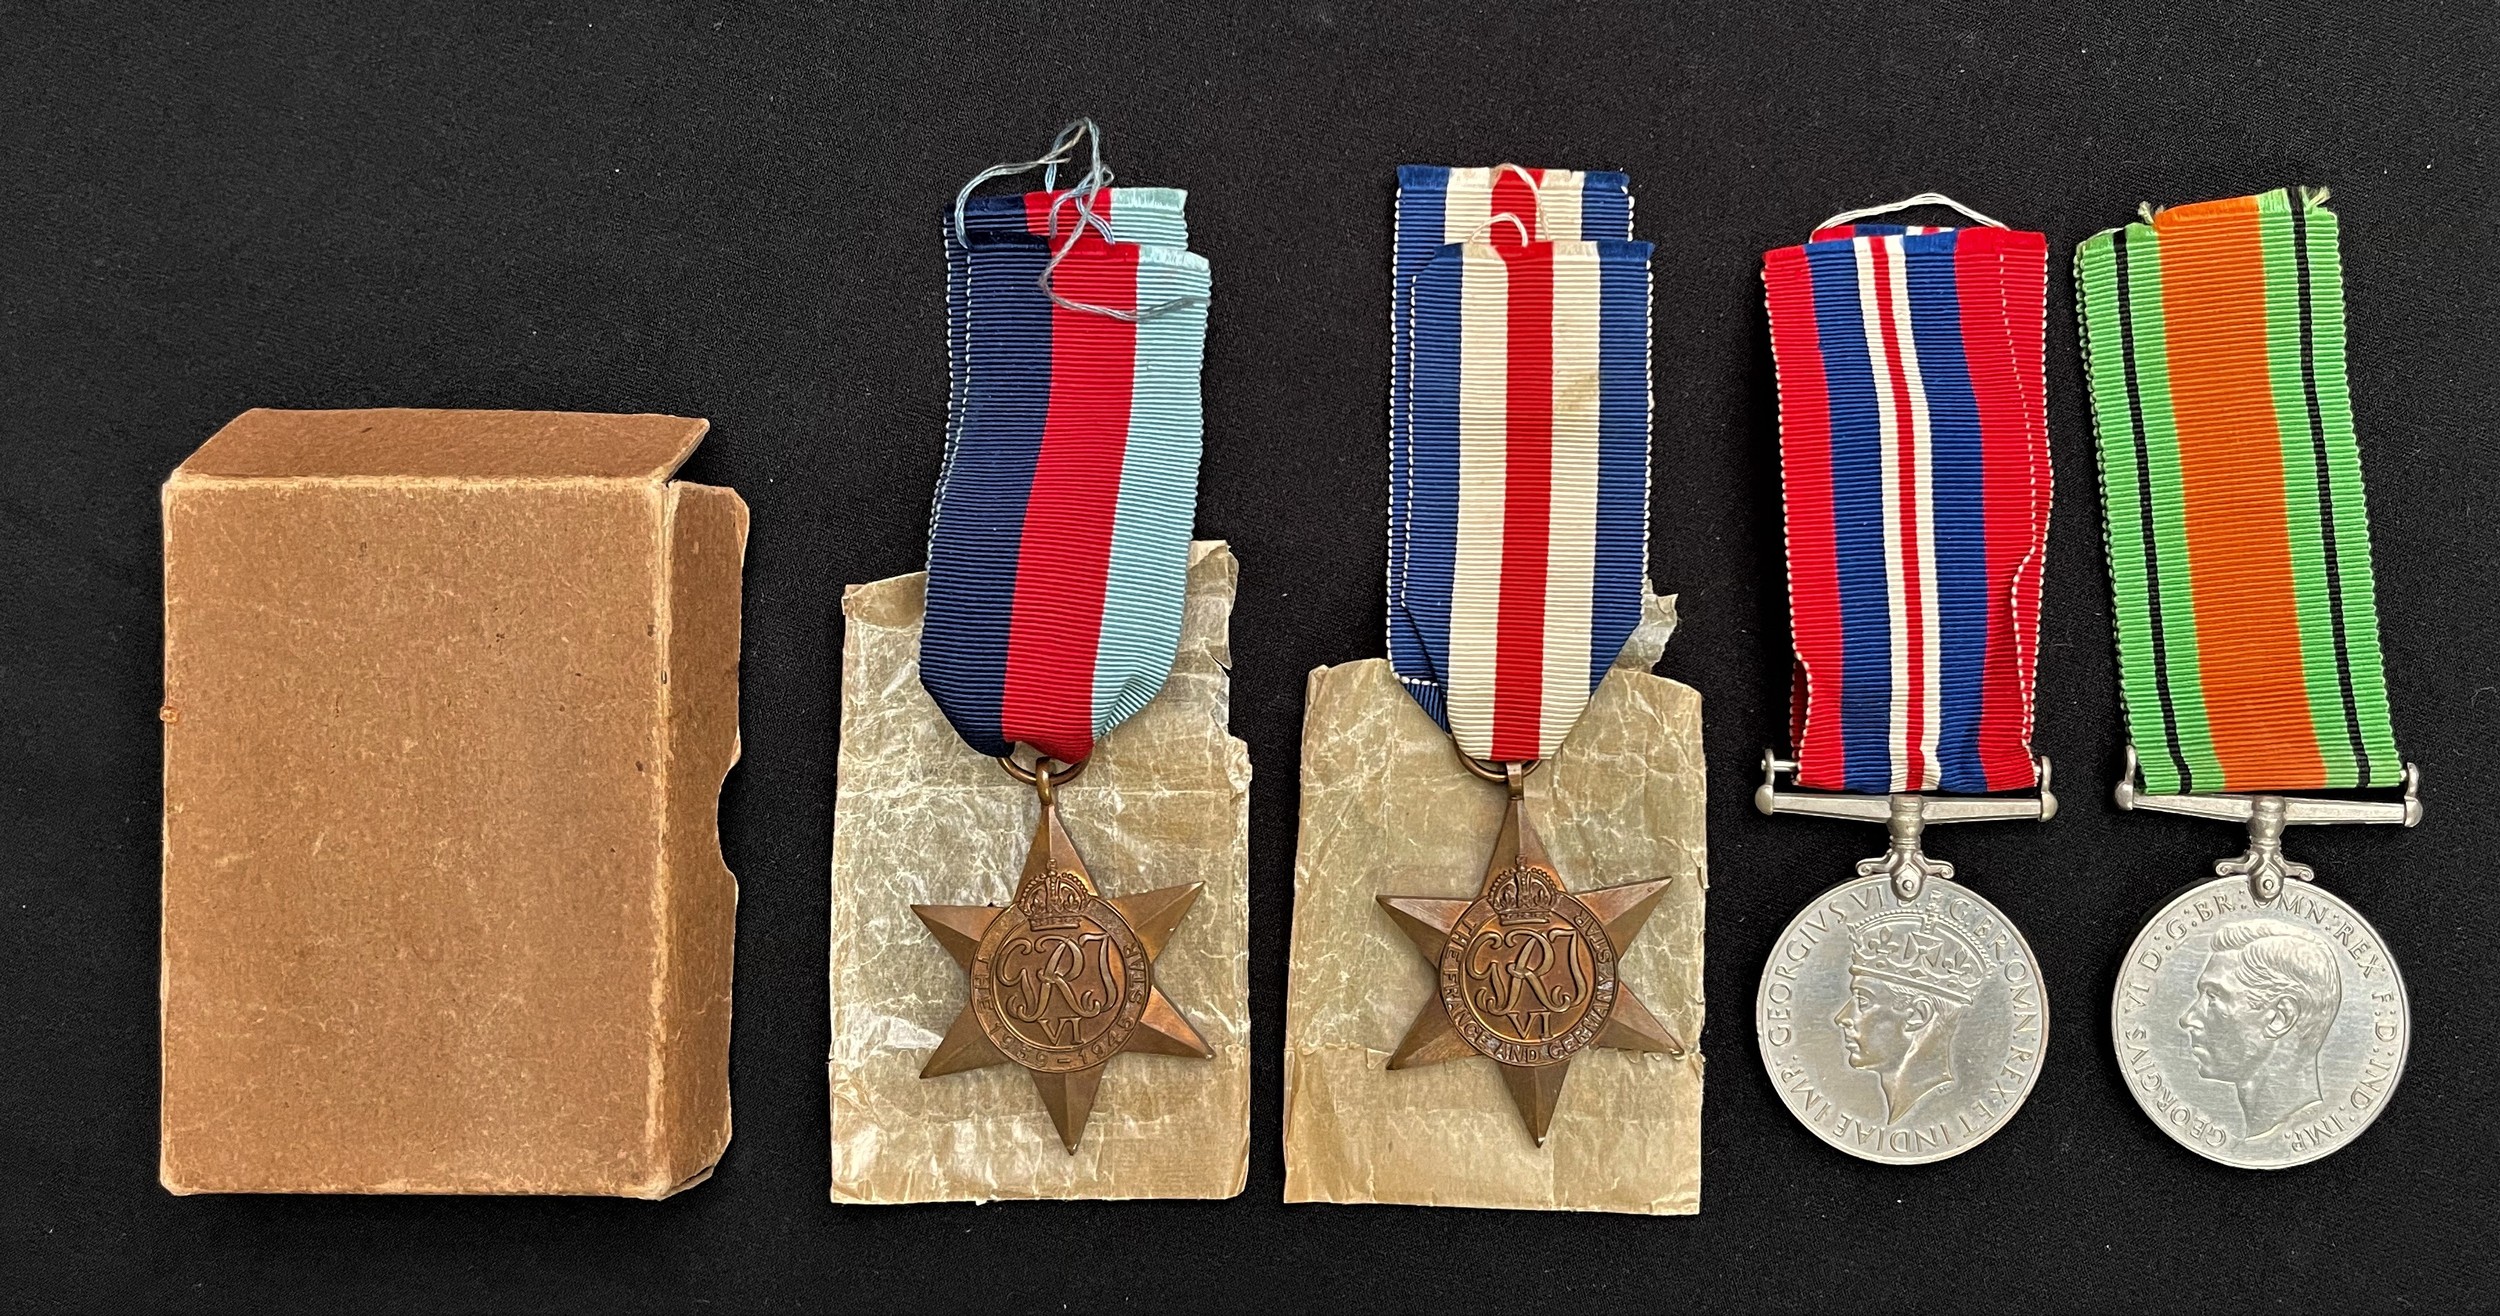 WW2 British Medals 1939-45 Star, France & Germany Star, War Medal & Defence Medal, all complete with